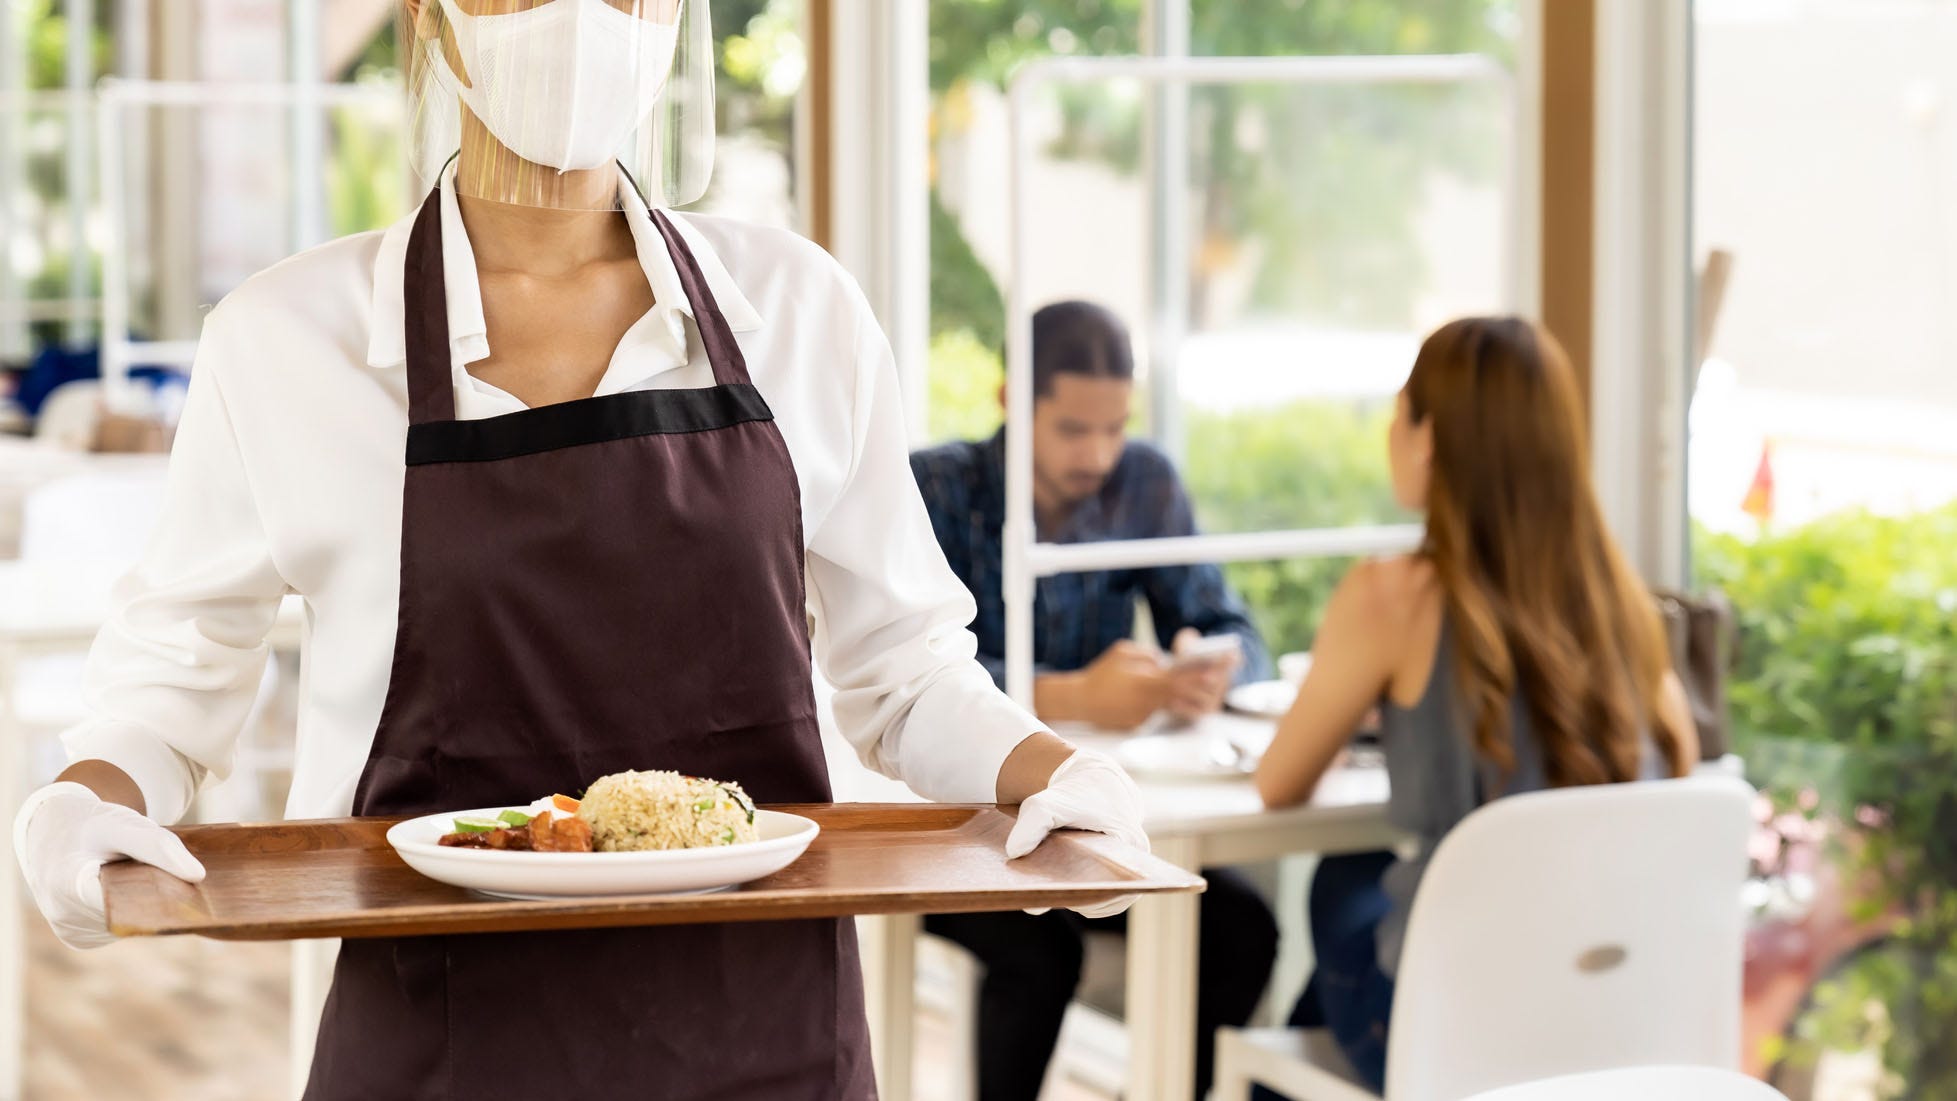 National Restaurant Association offering conflict-resolution courses on face mask feuds for foodservice workers